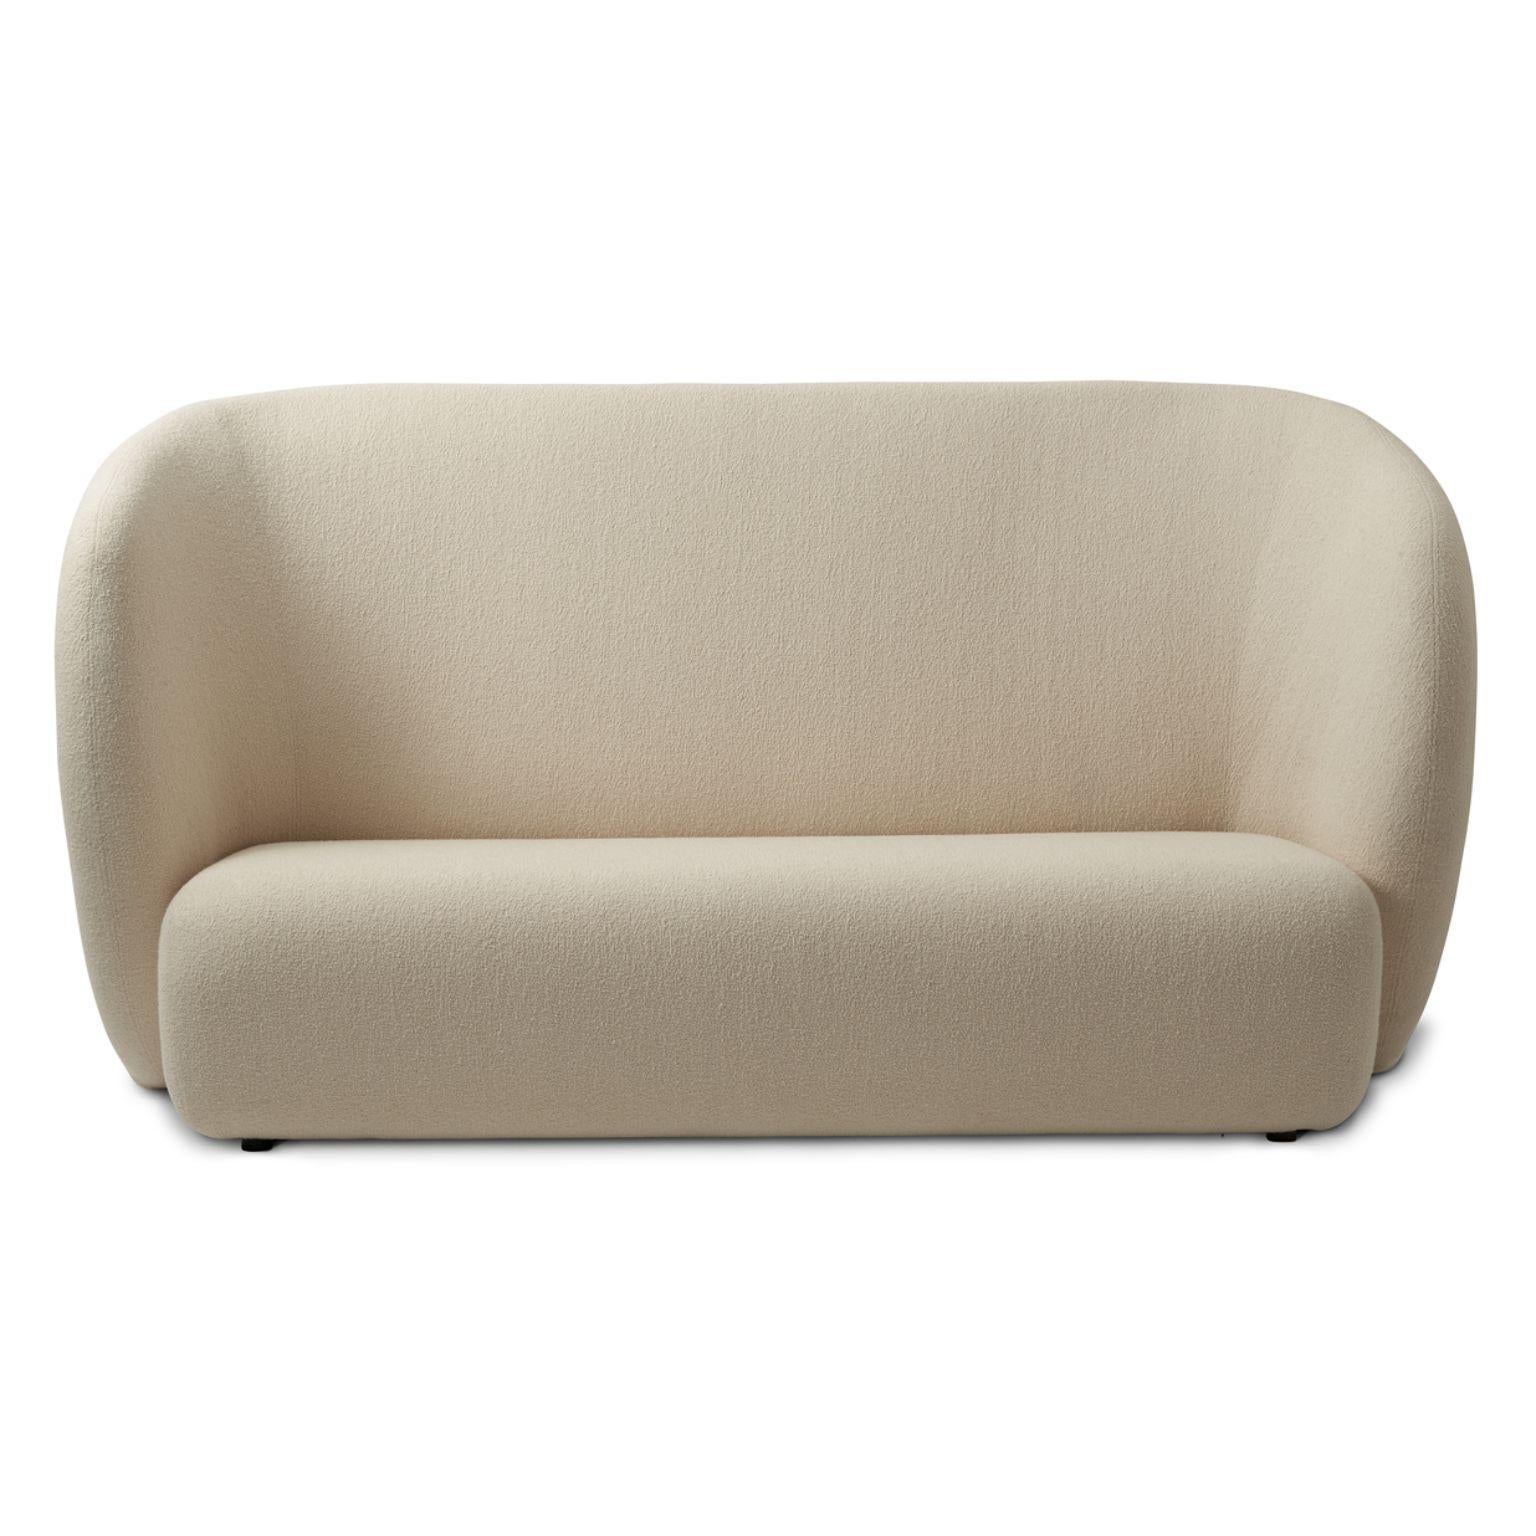 Haven 3 seater sand by Warm Nordic.
Dimensions: D220 x W84 x H 110/40 cm.
Material: Textile upholstery, Foam, Spring system, Wood.
Weight: 84 kg
Also available in different colours and finishes. 

Haven is a contemporary sofa with a simple,